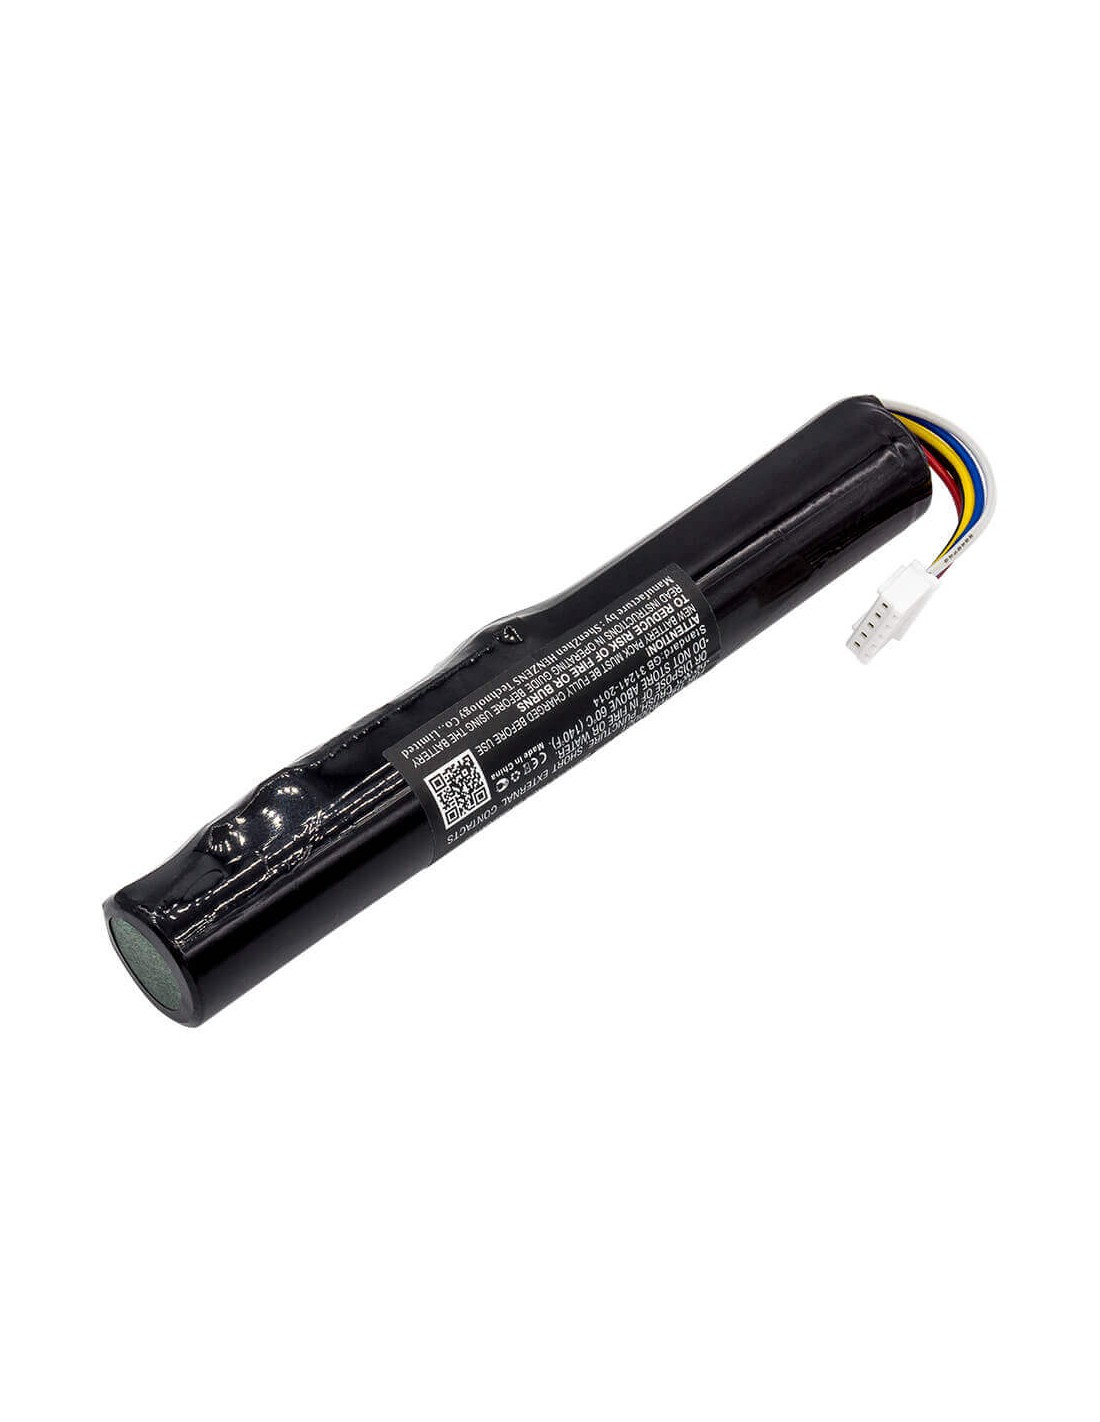 Battery for Bang & Olufsen, Beolit 15, Beolit 17, Beoplay A2, Beopl 7.4V, 3400mAh - 25.16Wh